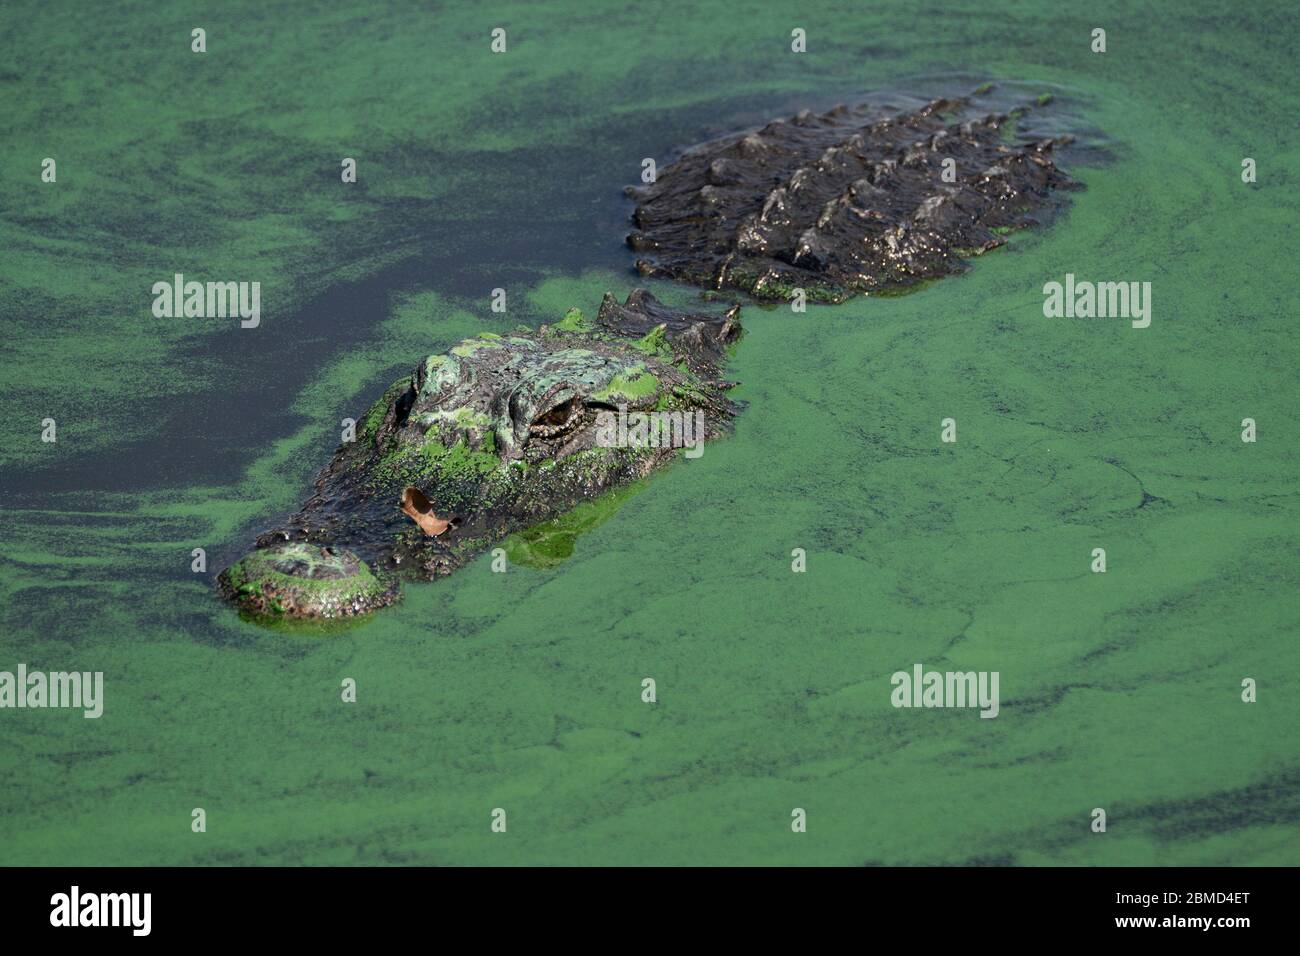 Pahokee, Florida, USA. 8th May, 2020. An alligator swims through blue-green algae in Lake Okeechobee. The blooms are a common summer phenomenon on the lake and can be toxic. Credit: Greg Lovett/ZUMA Wire/Alamy Live News Stock Photo